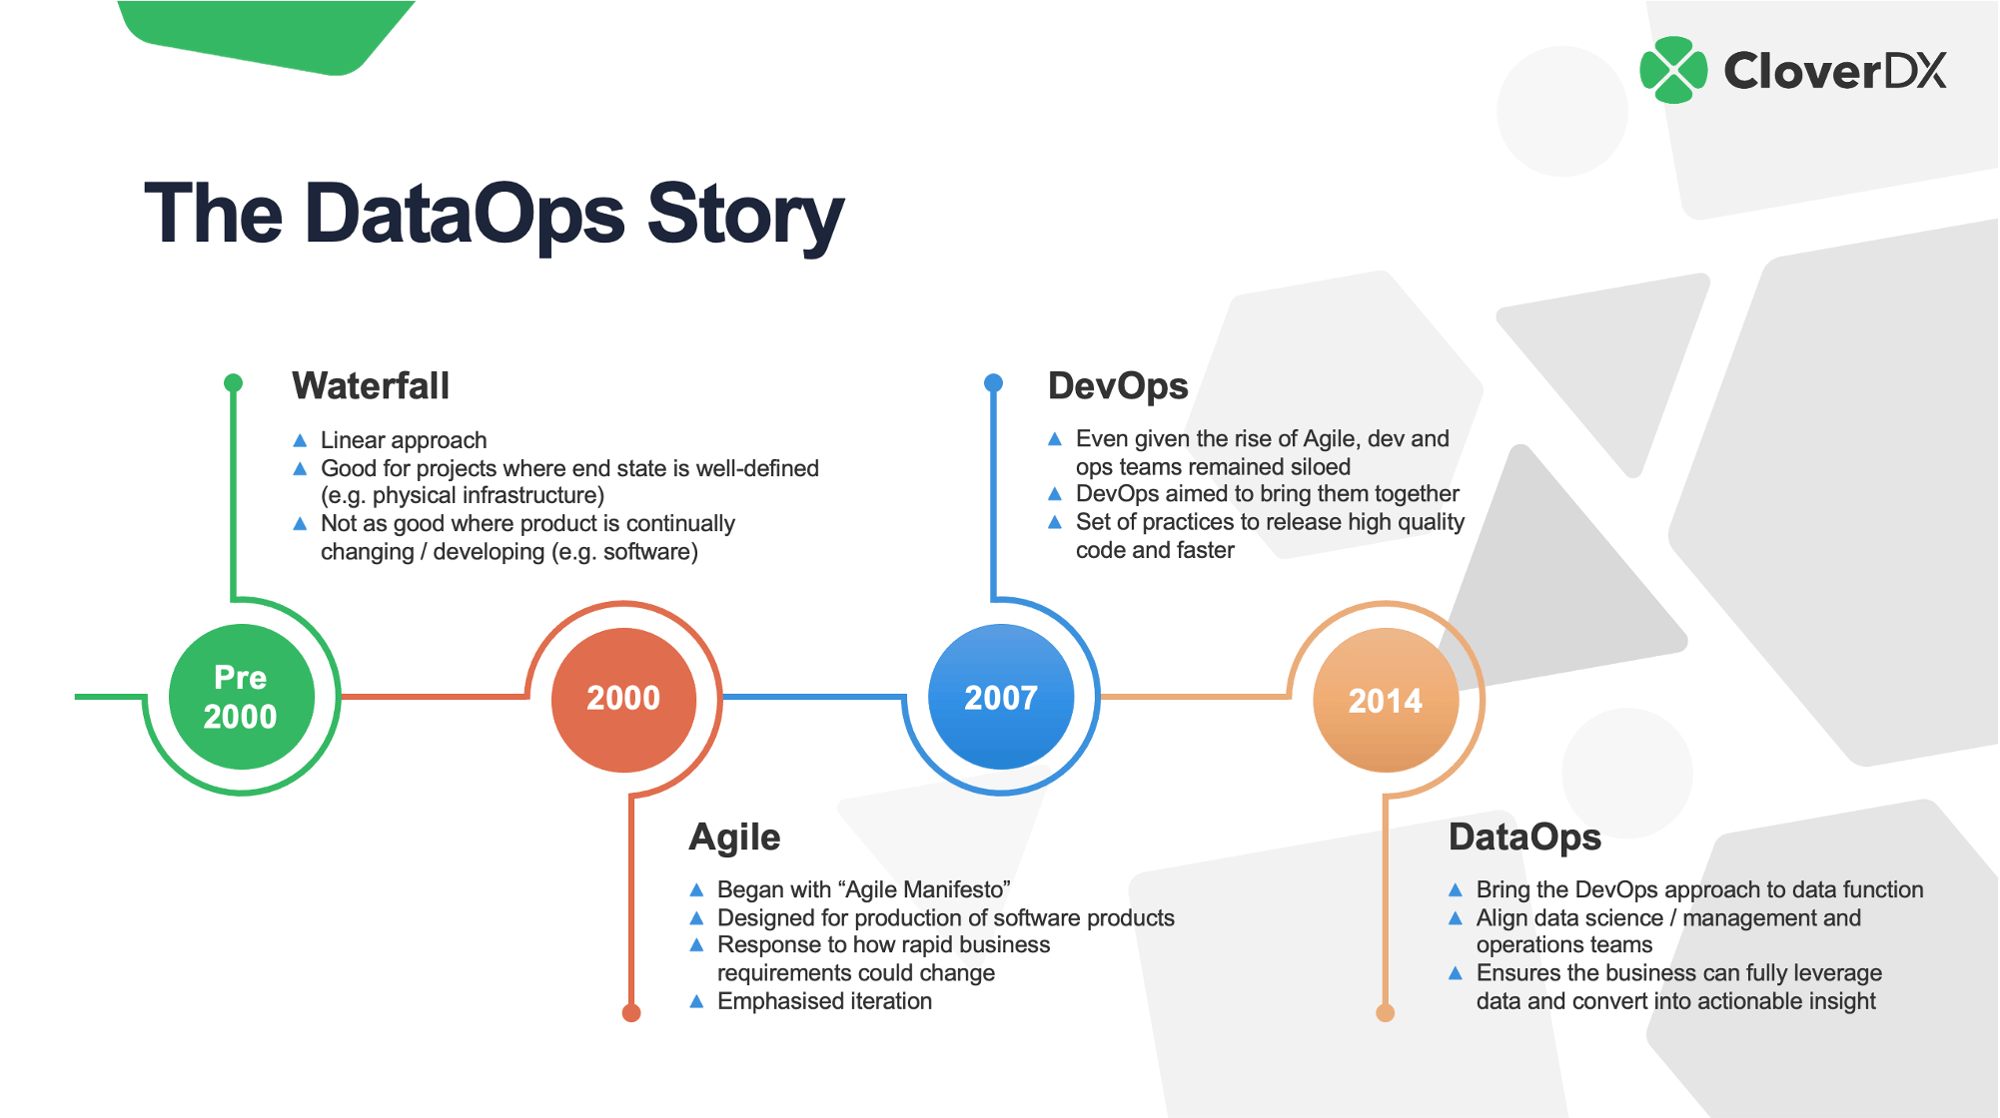 The DataOps story